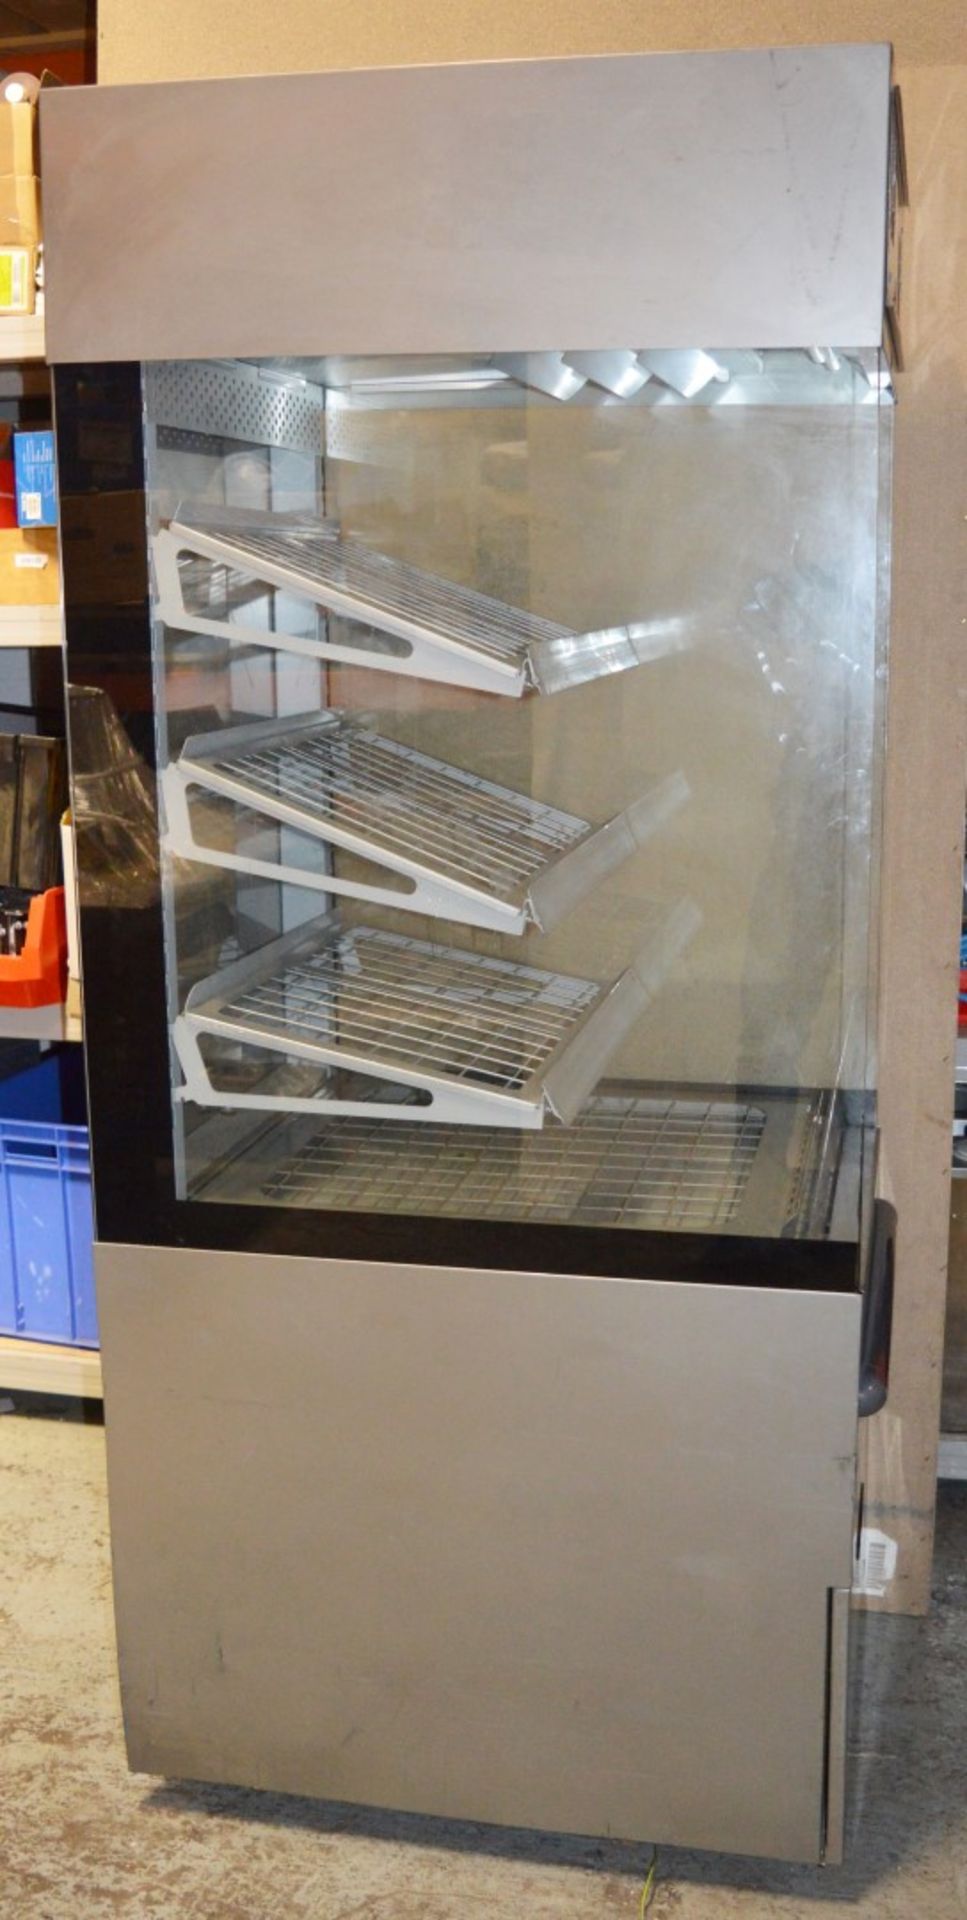 1 x Nuttall Turbo Serve Hot Food Display Cabinet - 240v - H197 x W62 x D83cms - CL232 - Removed From - Image 8 of 10